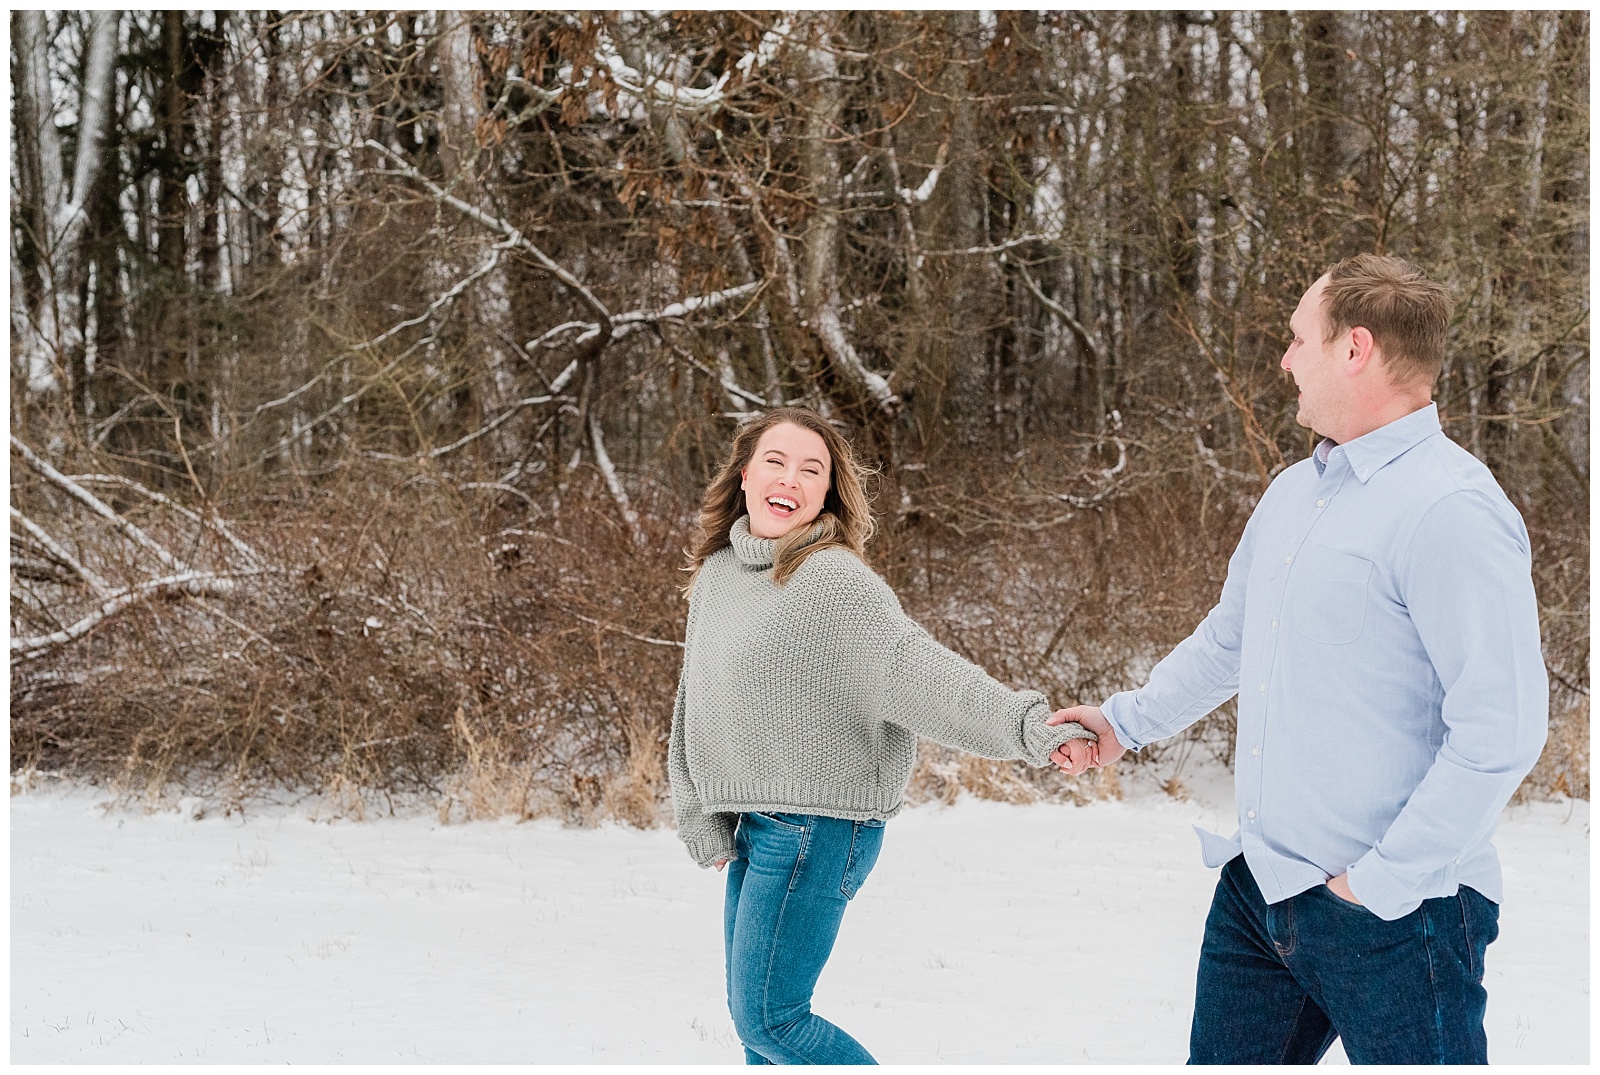 New Jersey Engagement Session, Snowy, Winter, Cozy, Session, Wedding Photographer, Cross Estate Gardens, Snow, Wintry, Light and Airy, Laughter